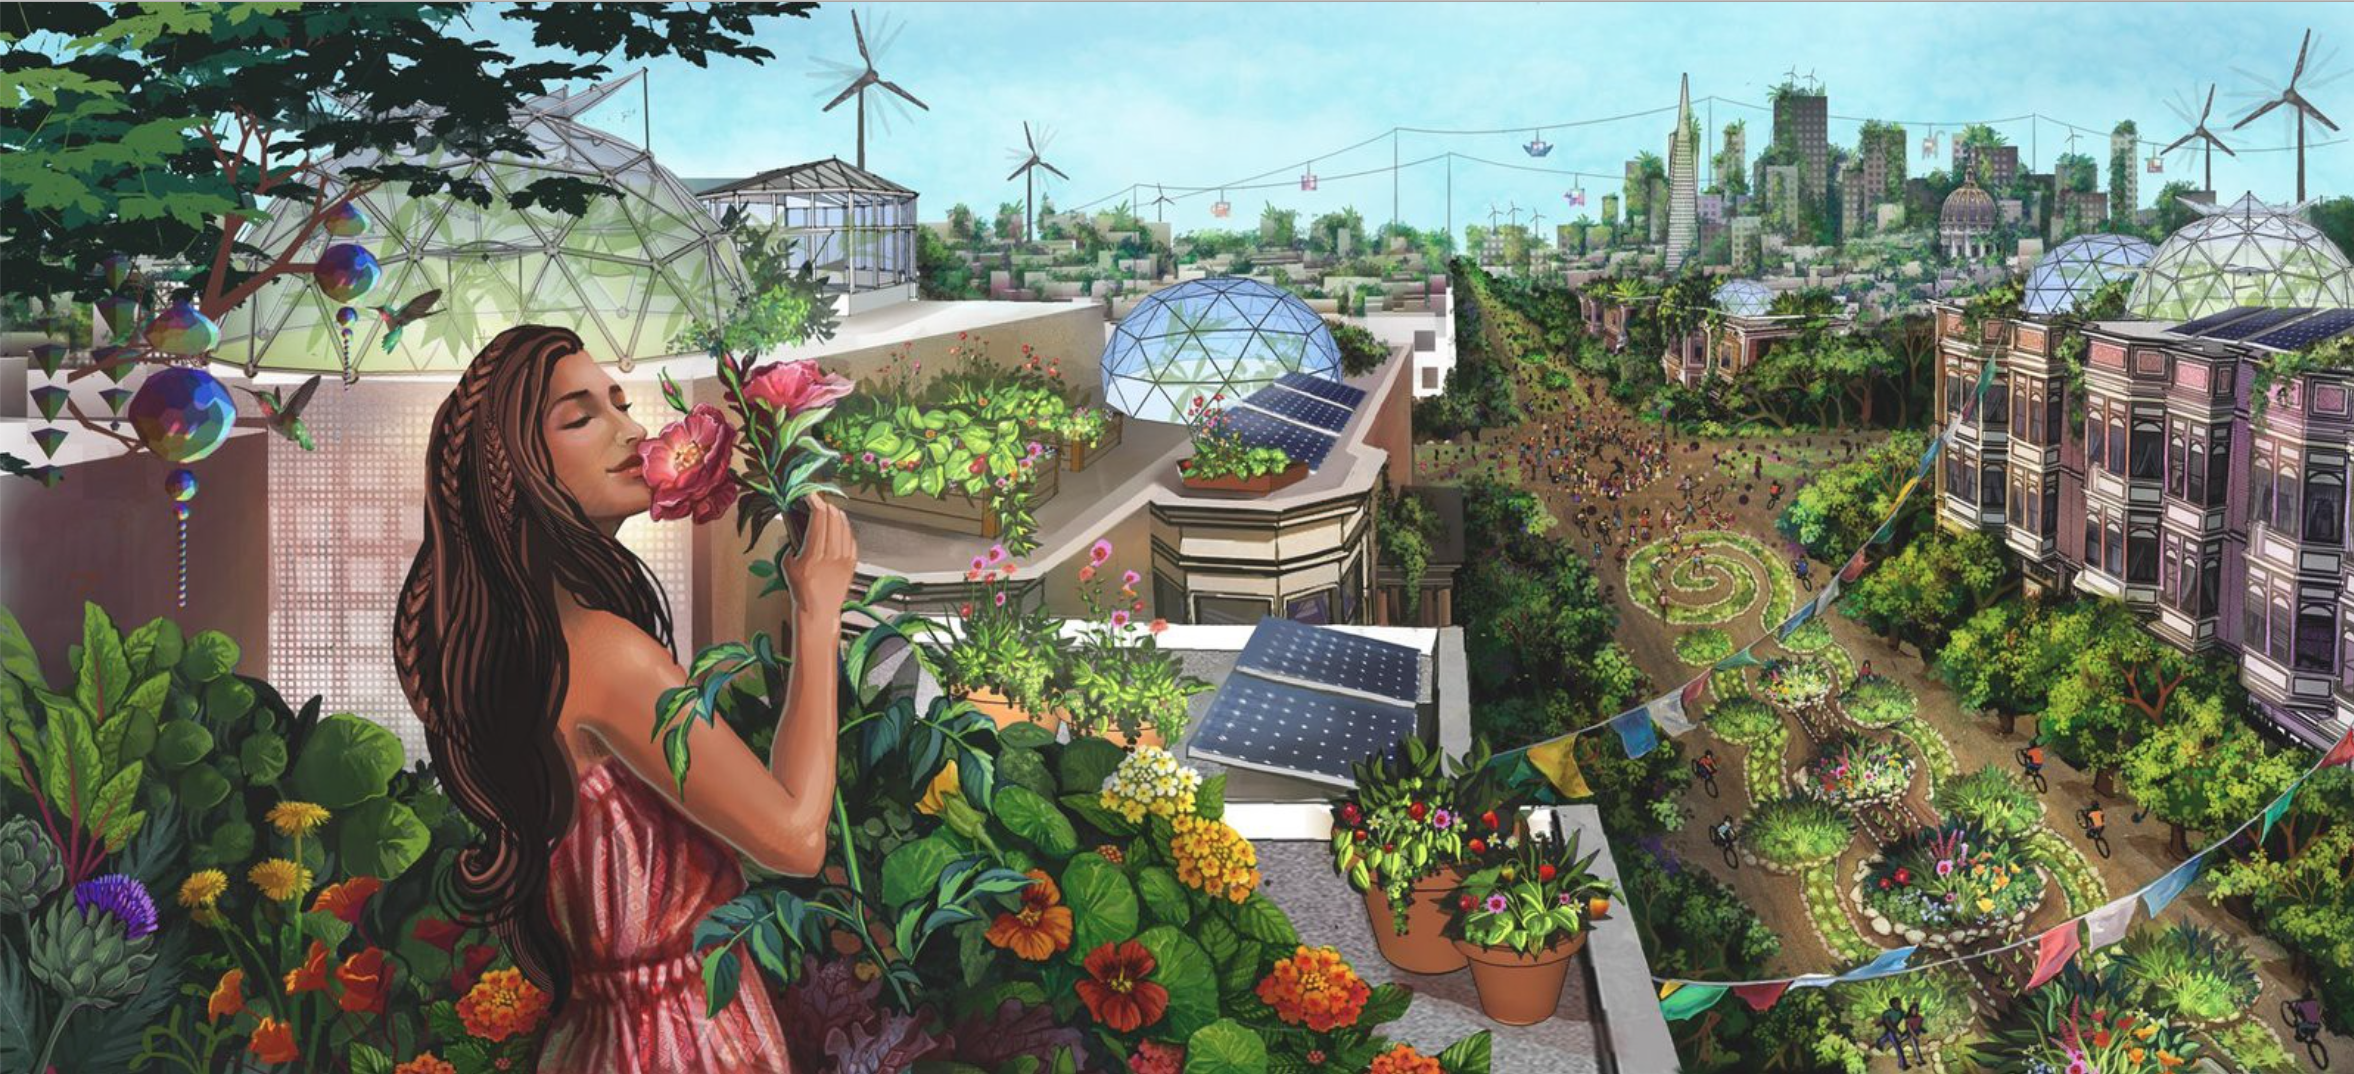 What is a Solarpunk? - GKToday